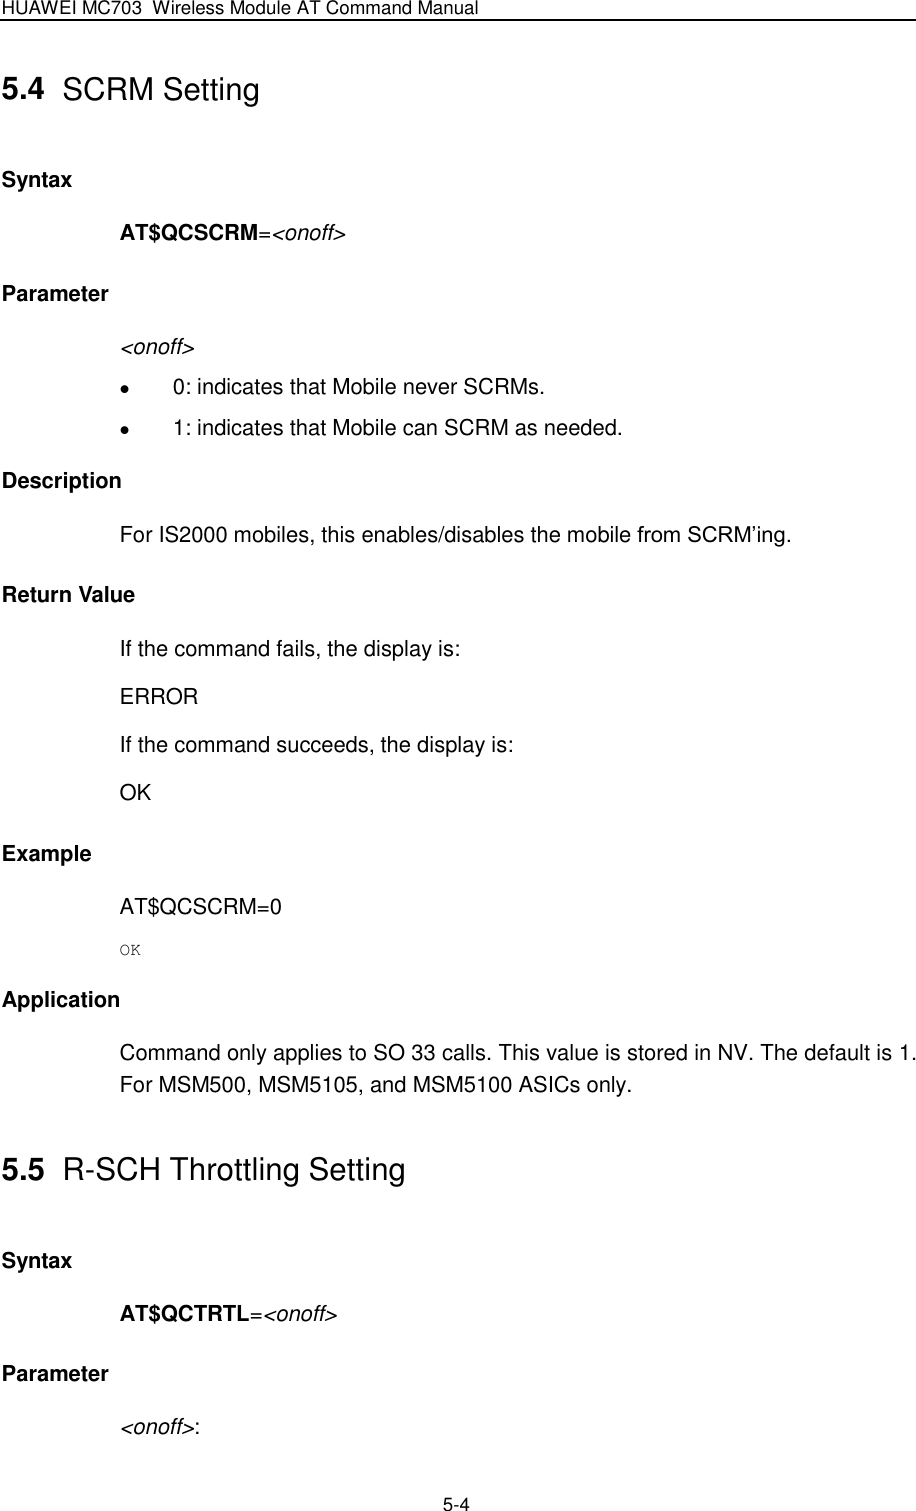 HUAWEI MC703 Wireless Module AT Command Manual   5-4 5.4  SCRM Setting Syntax AT$QCSCRM=&lt;onoff&gt; Parameter &lt;onoff&gt;  0: indicates that Mobile never SCRMs.  1: indicates that Mobile can SCRM as needed. Description For IS2000 mobiles, this enables/disables the mobile from SCRM’ing. Return Value If the command fails, the display is: ERROR If the command succeeds, the display is: OK Example AT$QCSCRM=0 OK Application Command only applies to SO 33 calls. This value is stored in NV. The default is 1. For MSM500, MSM5105, and MSM5100 ASICs only. 5.5  R-SCH Throttling Setting Syntax AT$QCTRTL=&lt;onoff&gt; Parameter &lt;onoff&gt;:   